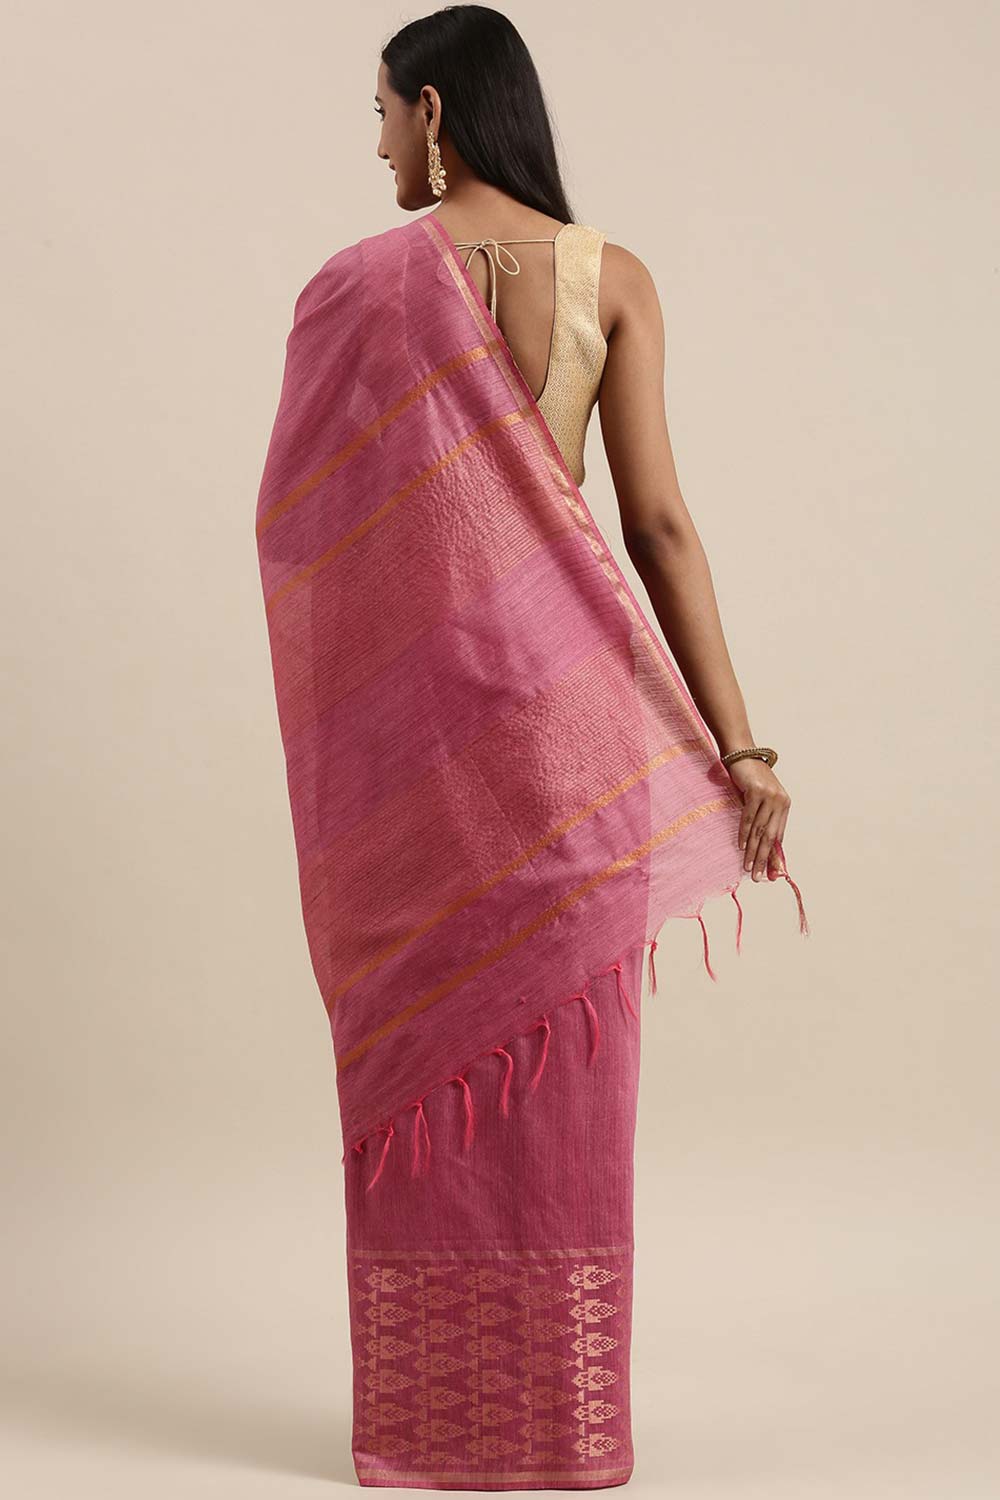 Shop Lana Pink Silk Blend Stripe One Minute Saree at best offer at our  Store - One Minute Saree